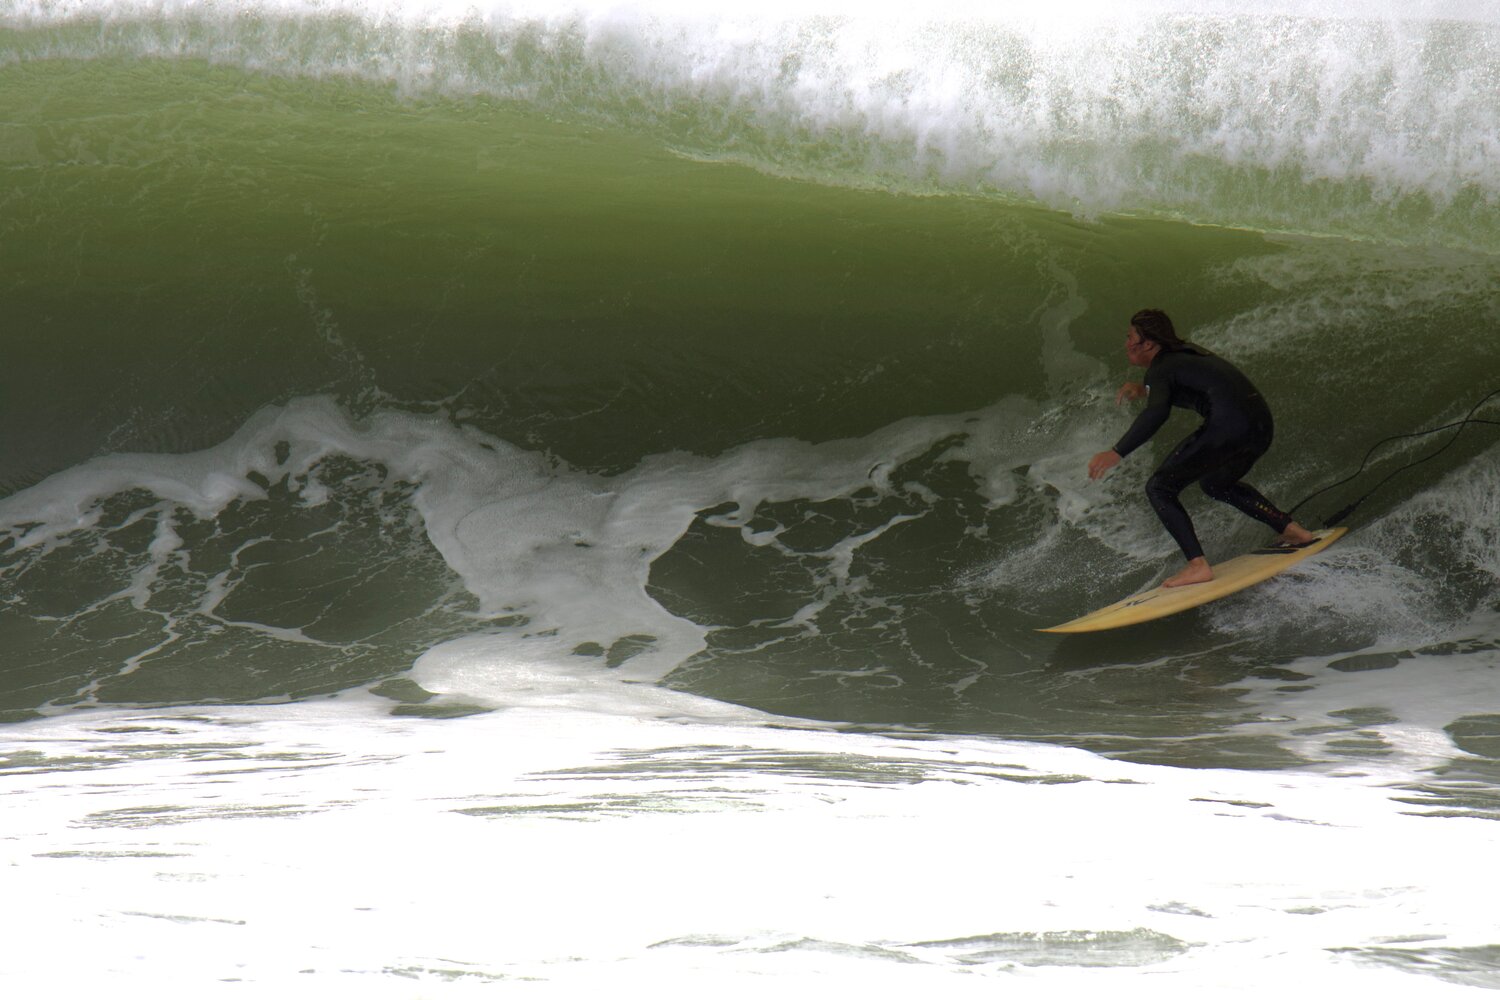 Several surfers took advantage of high surf from Hurricane Lee on Friday at Maddequecham Beach.